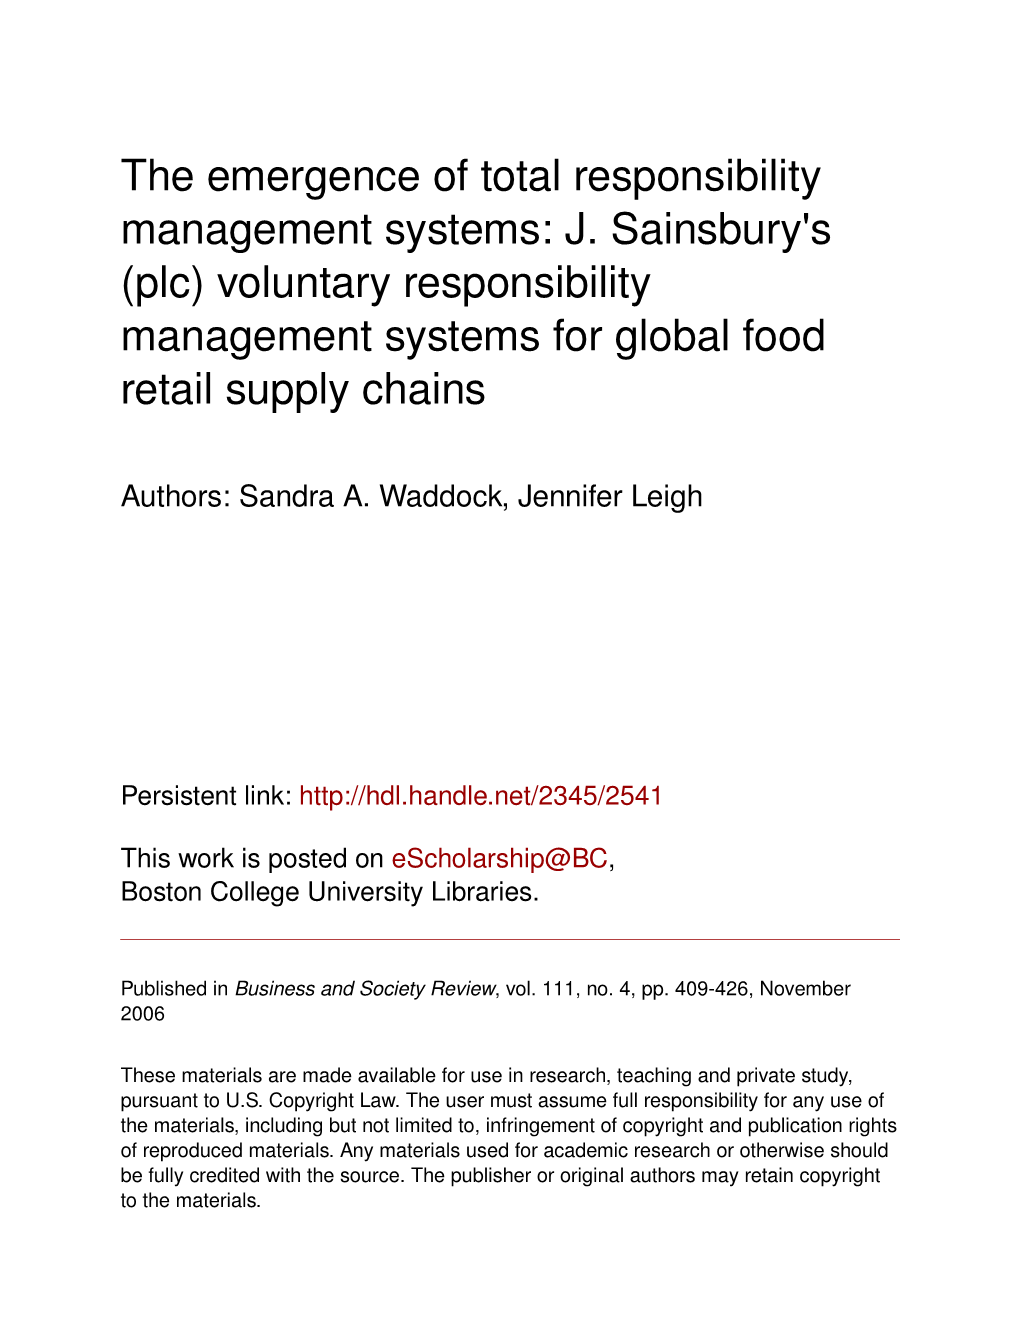 The Emergence of Total Responsibility Management Systems: J